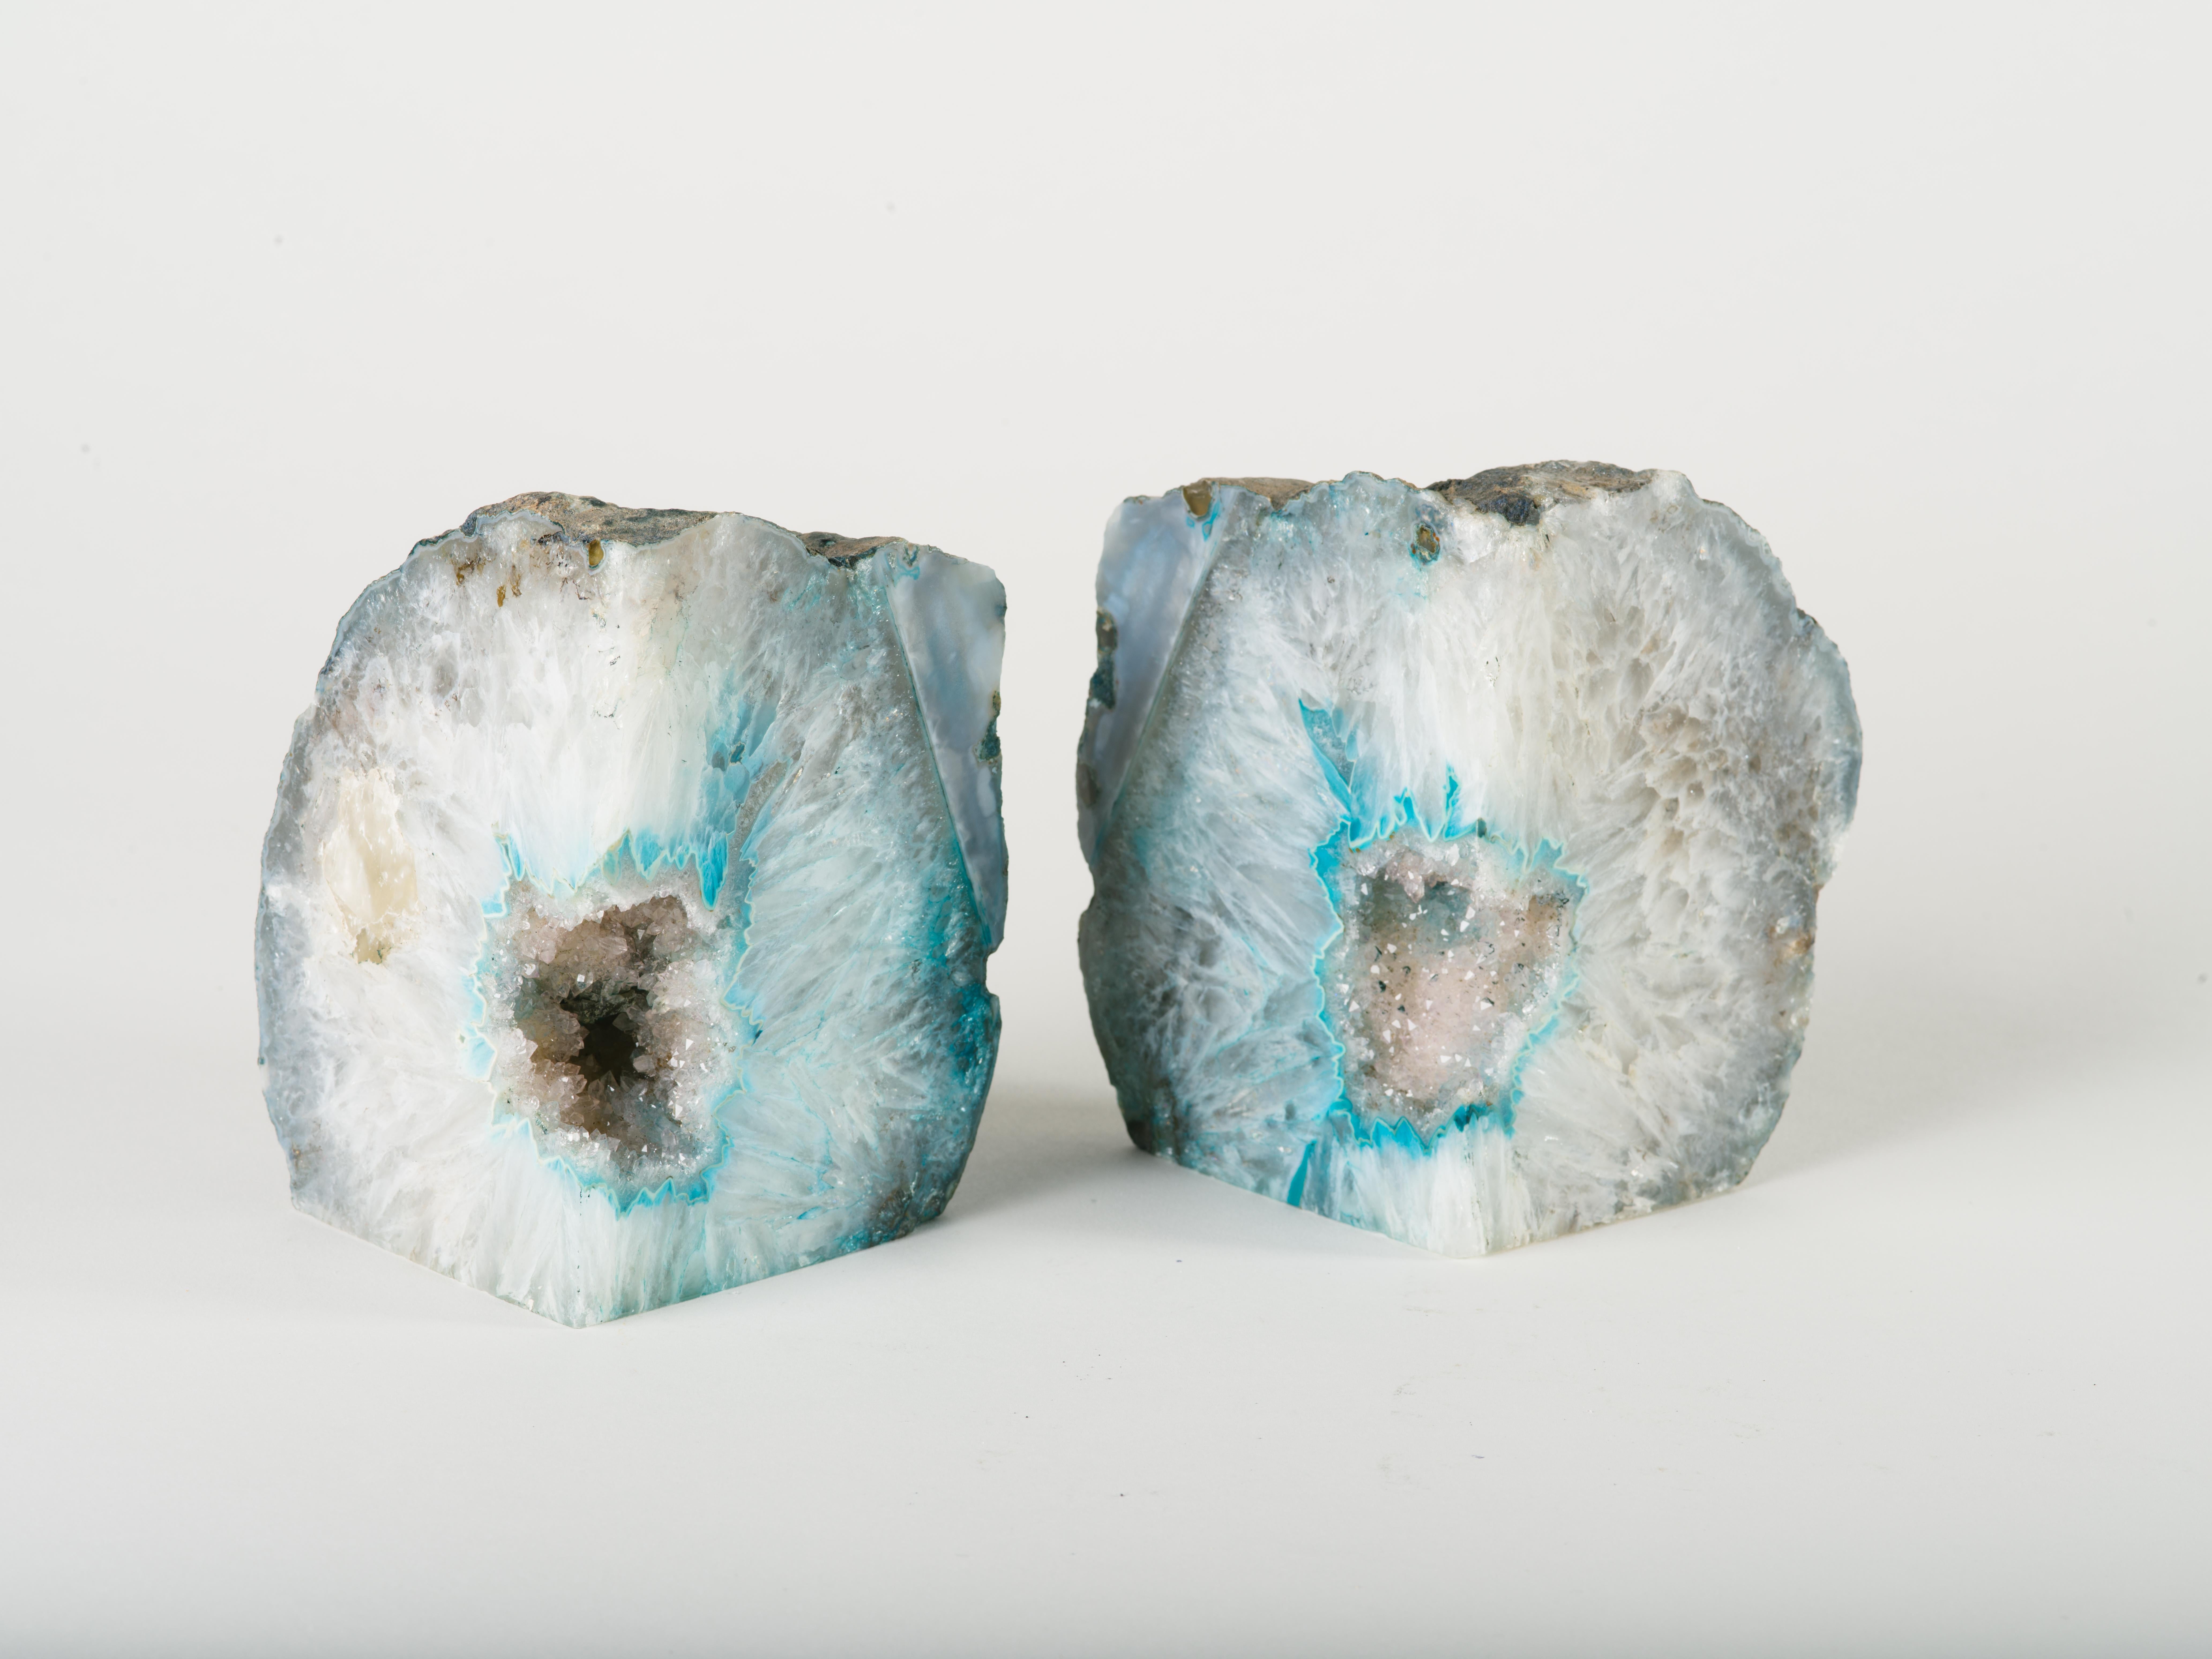 Organic Modern Pair of Crystal Geode Bookends with Hues of Turquoise